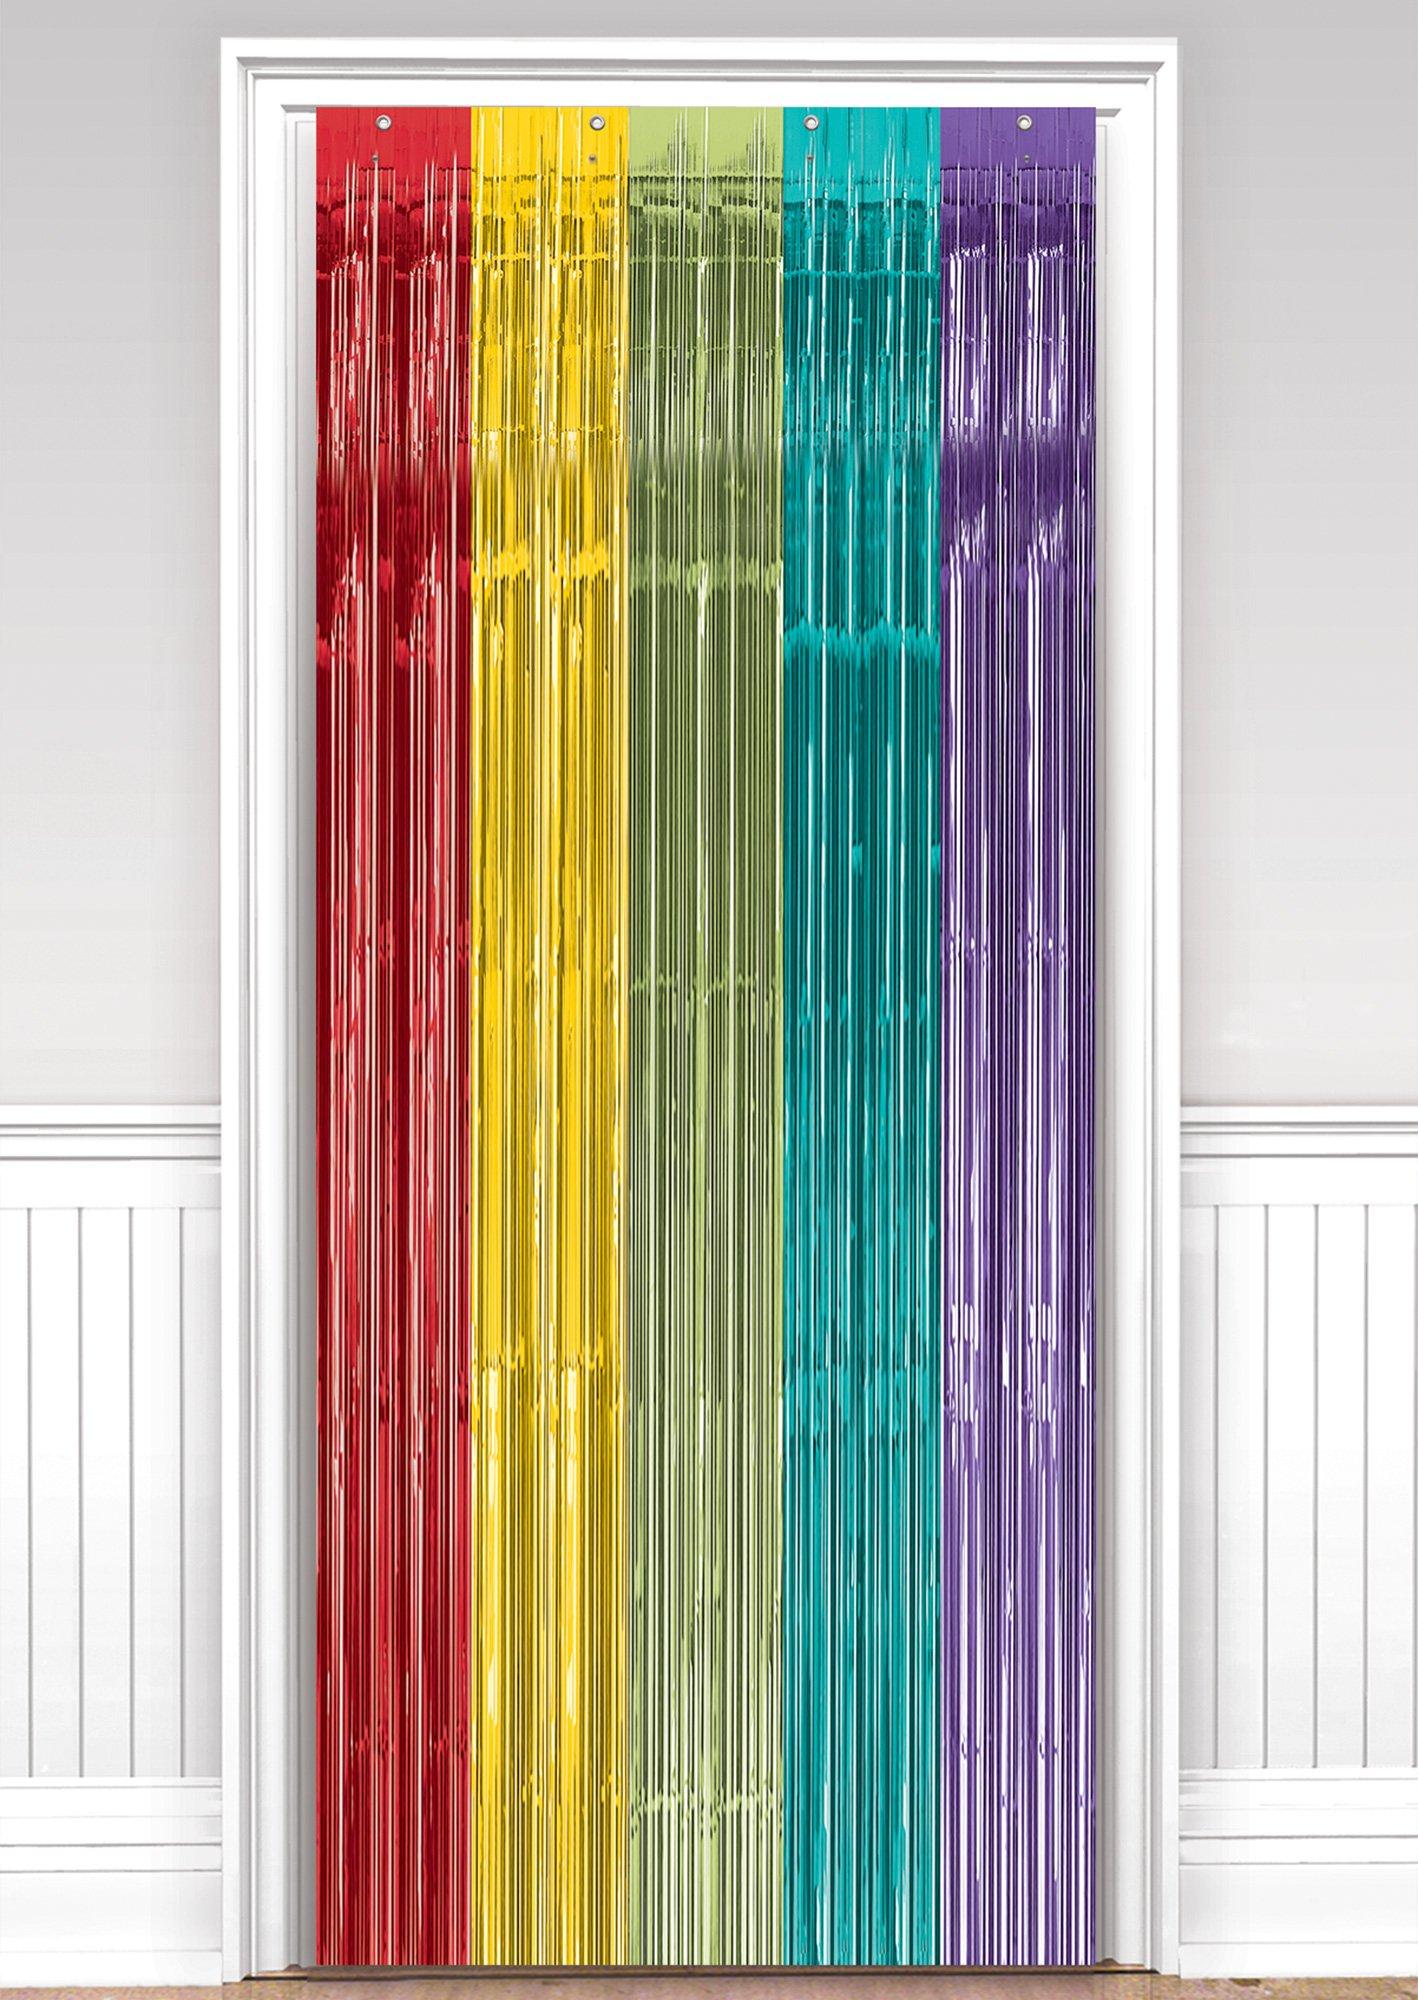 Street curtain alpujarra multicolor stripes of trabillas140 x 260cm for  windows and Exterior patio doors made in Spain. Free delivery 24/48h. -  AliExpress